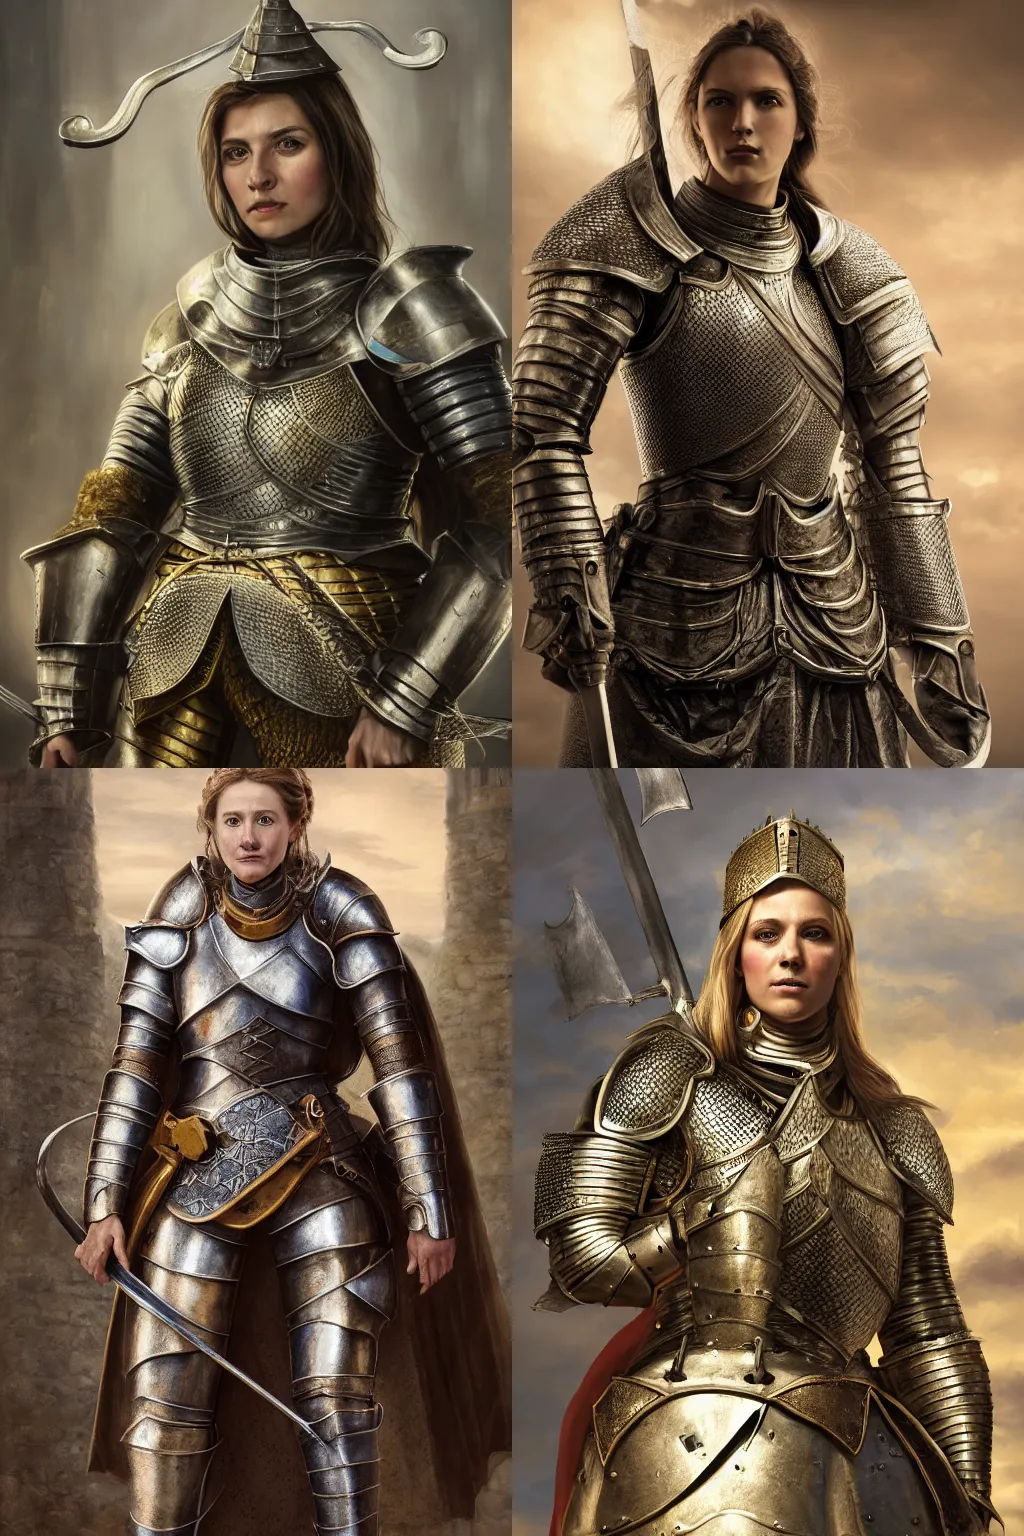 photo of a young female knight with giant boobs, game of thrones 